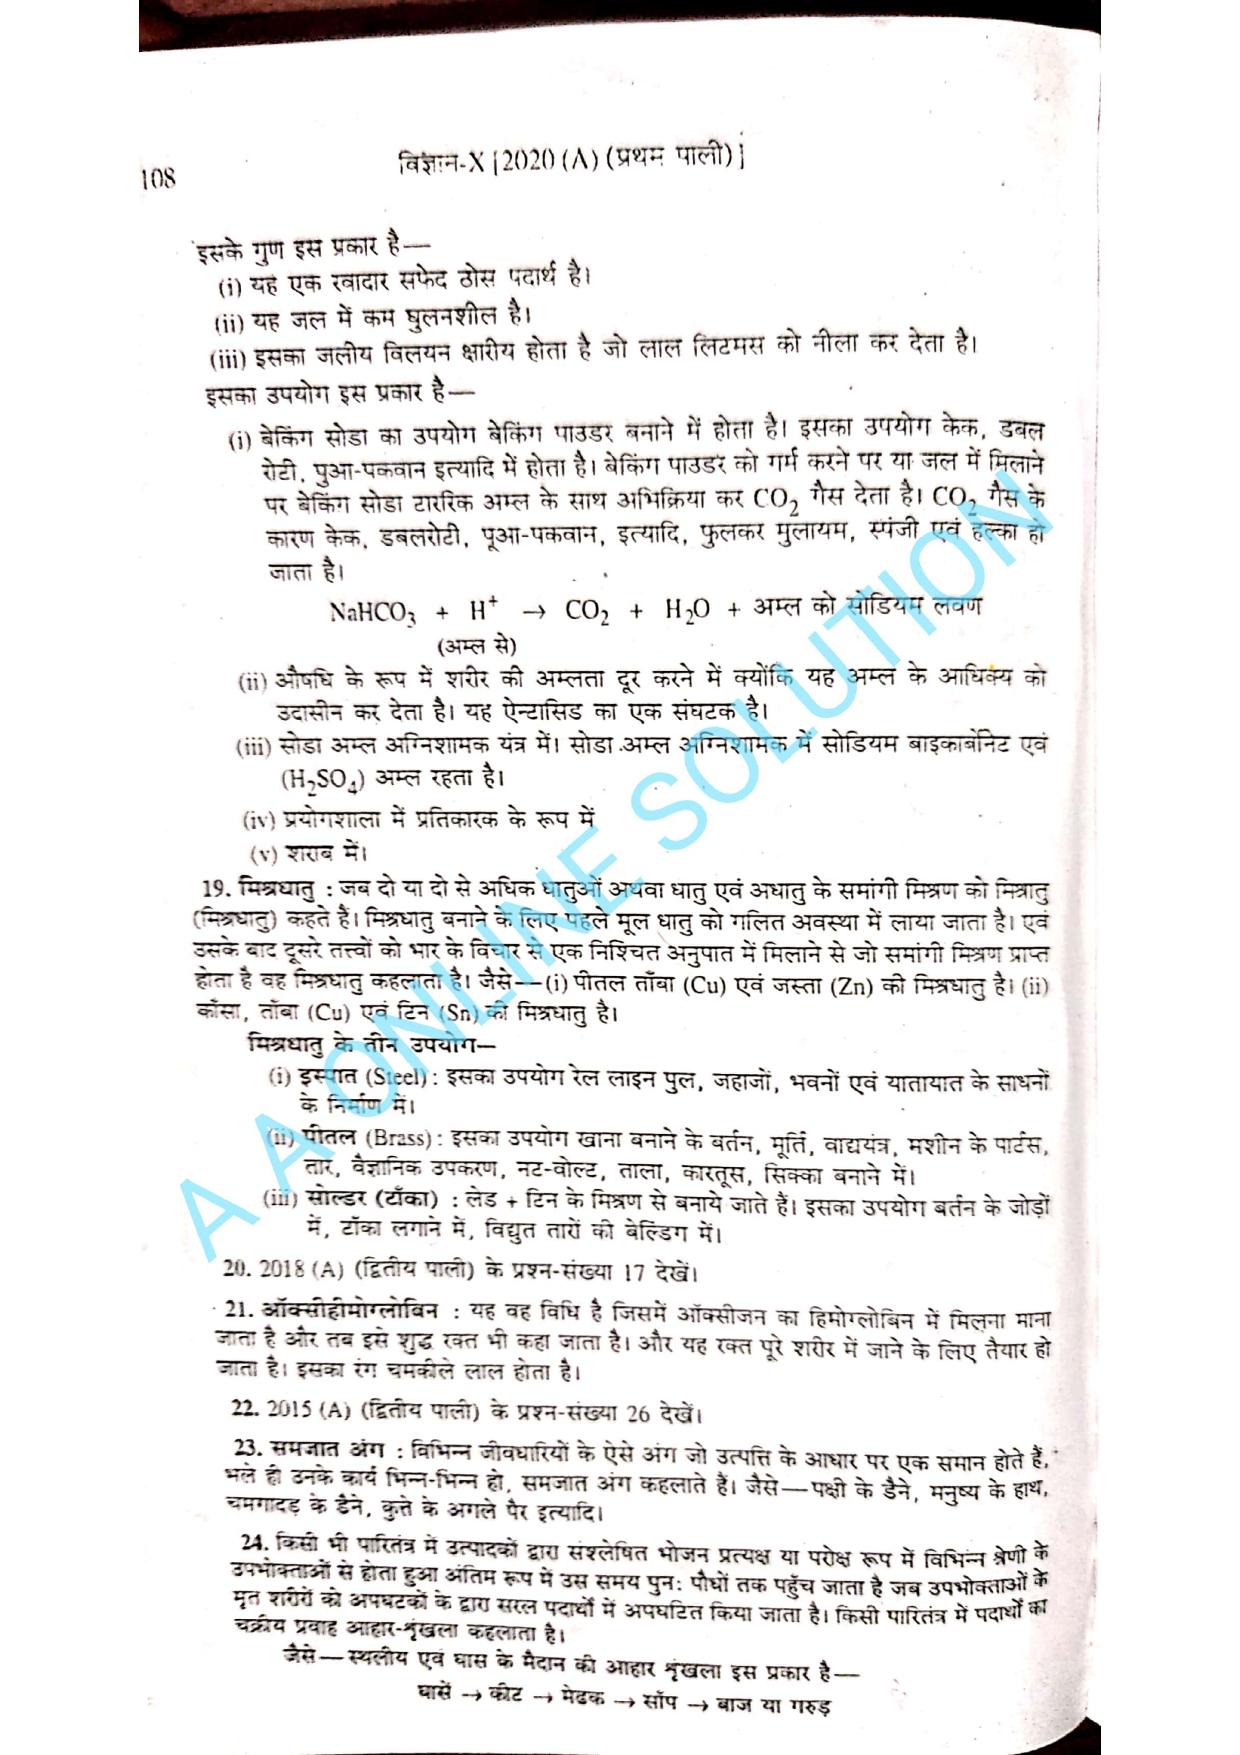 Bihar Board Class 10 Science 2020 (1st Sitting) Question Paper - Page 8